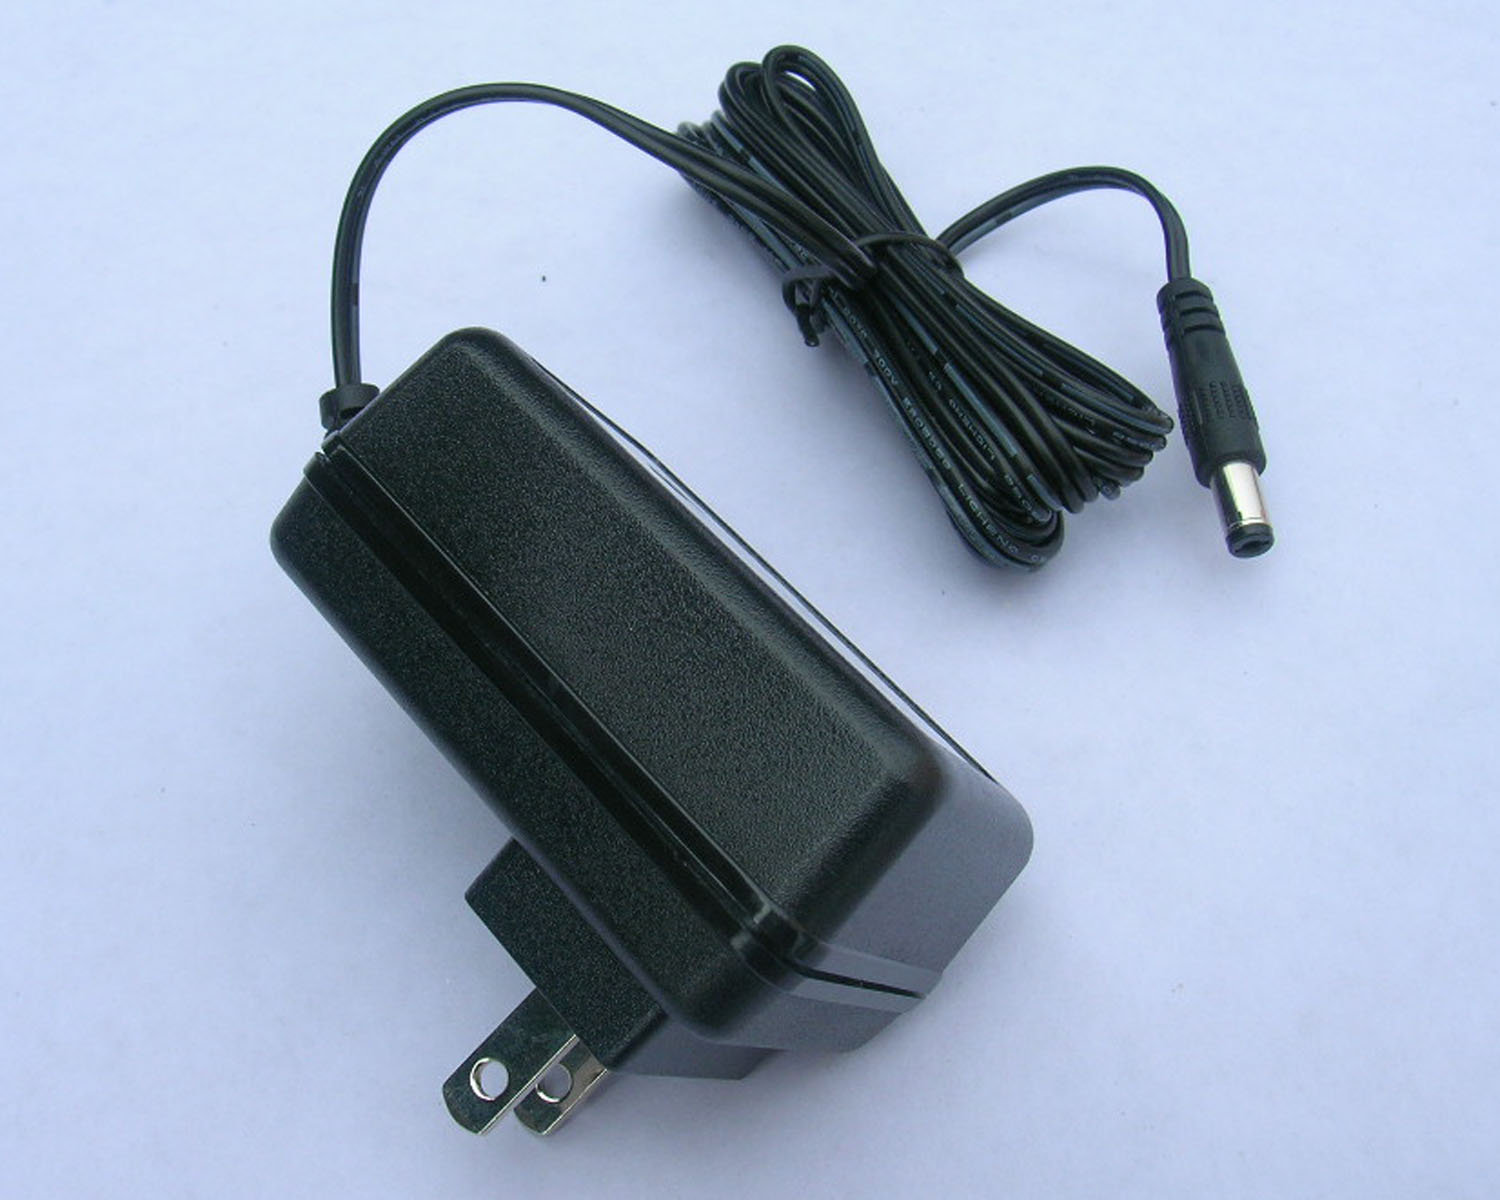 MCU Ni mh battery charger 9V 1.5A 6 series cell UL